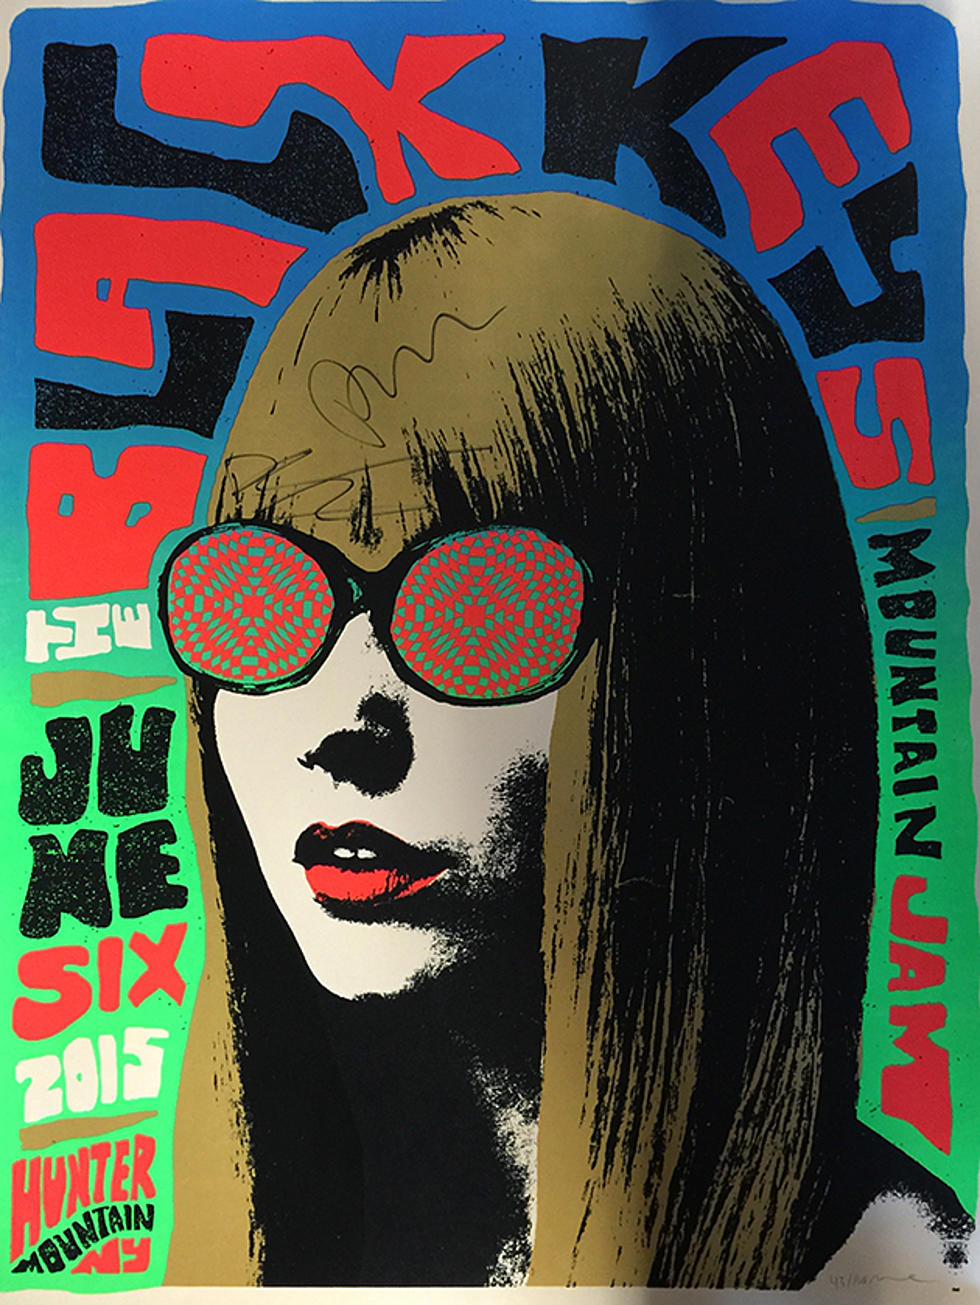 Enter to Win an Autographed Black Keys Gig Poster From Mountain Jam 2015